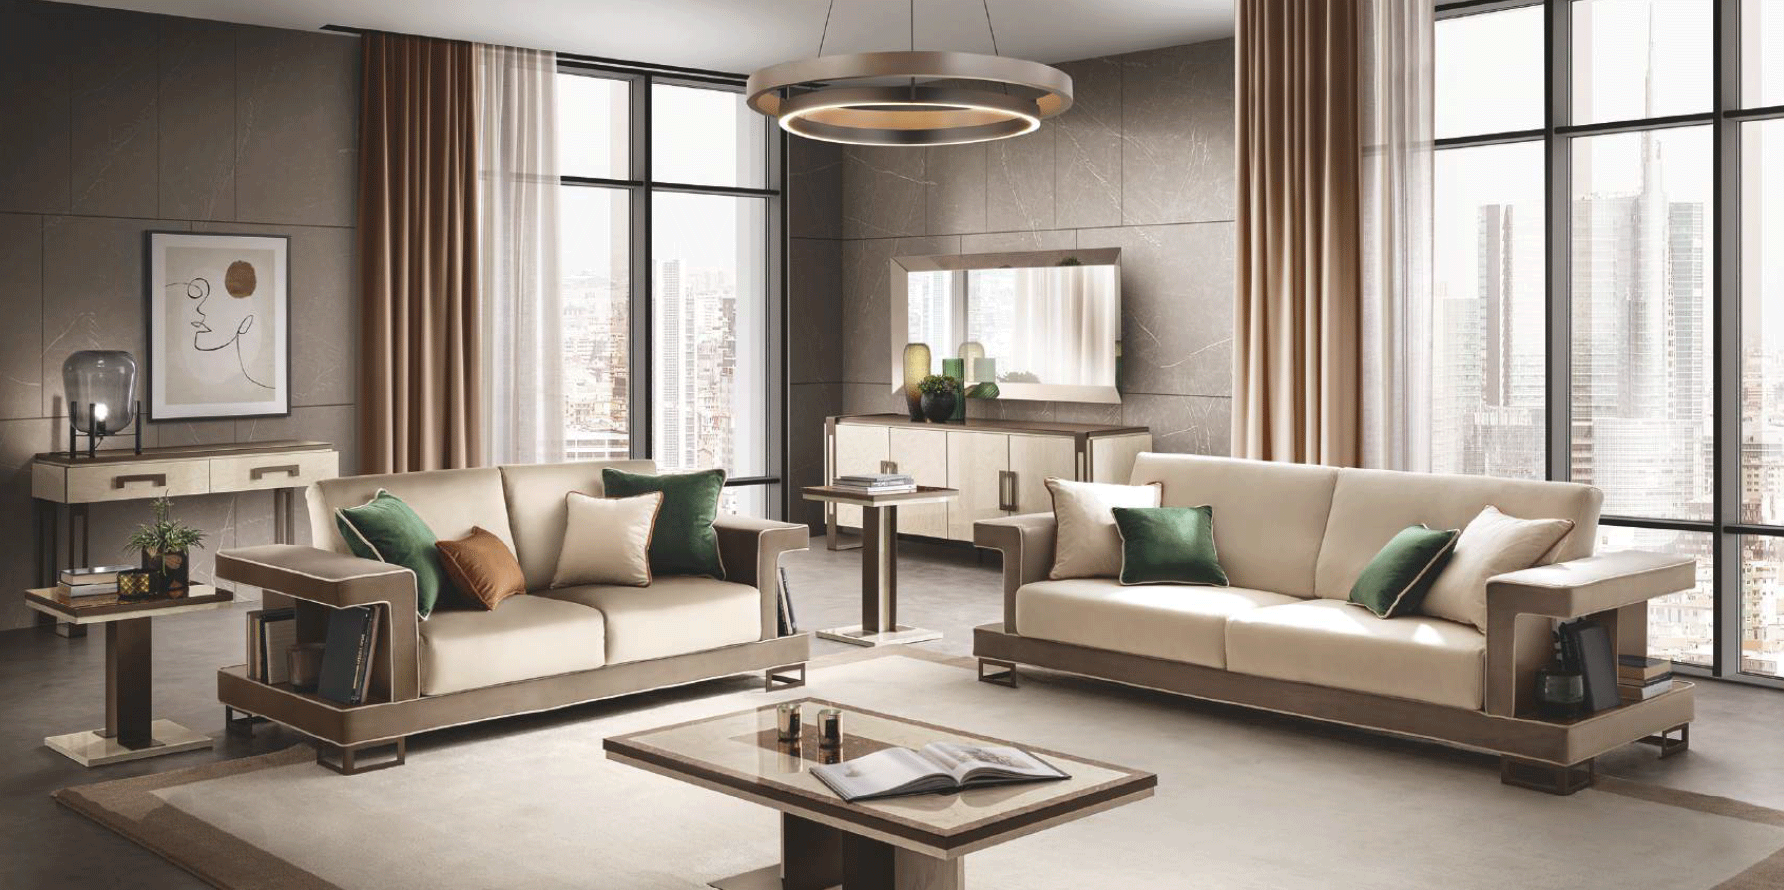 Brands Status Modern Collections, Italy Poesia Living room Additional items